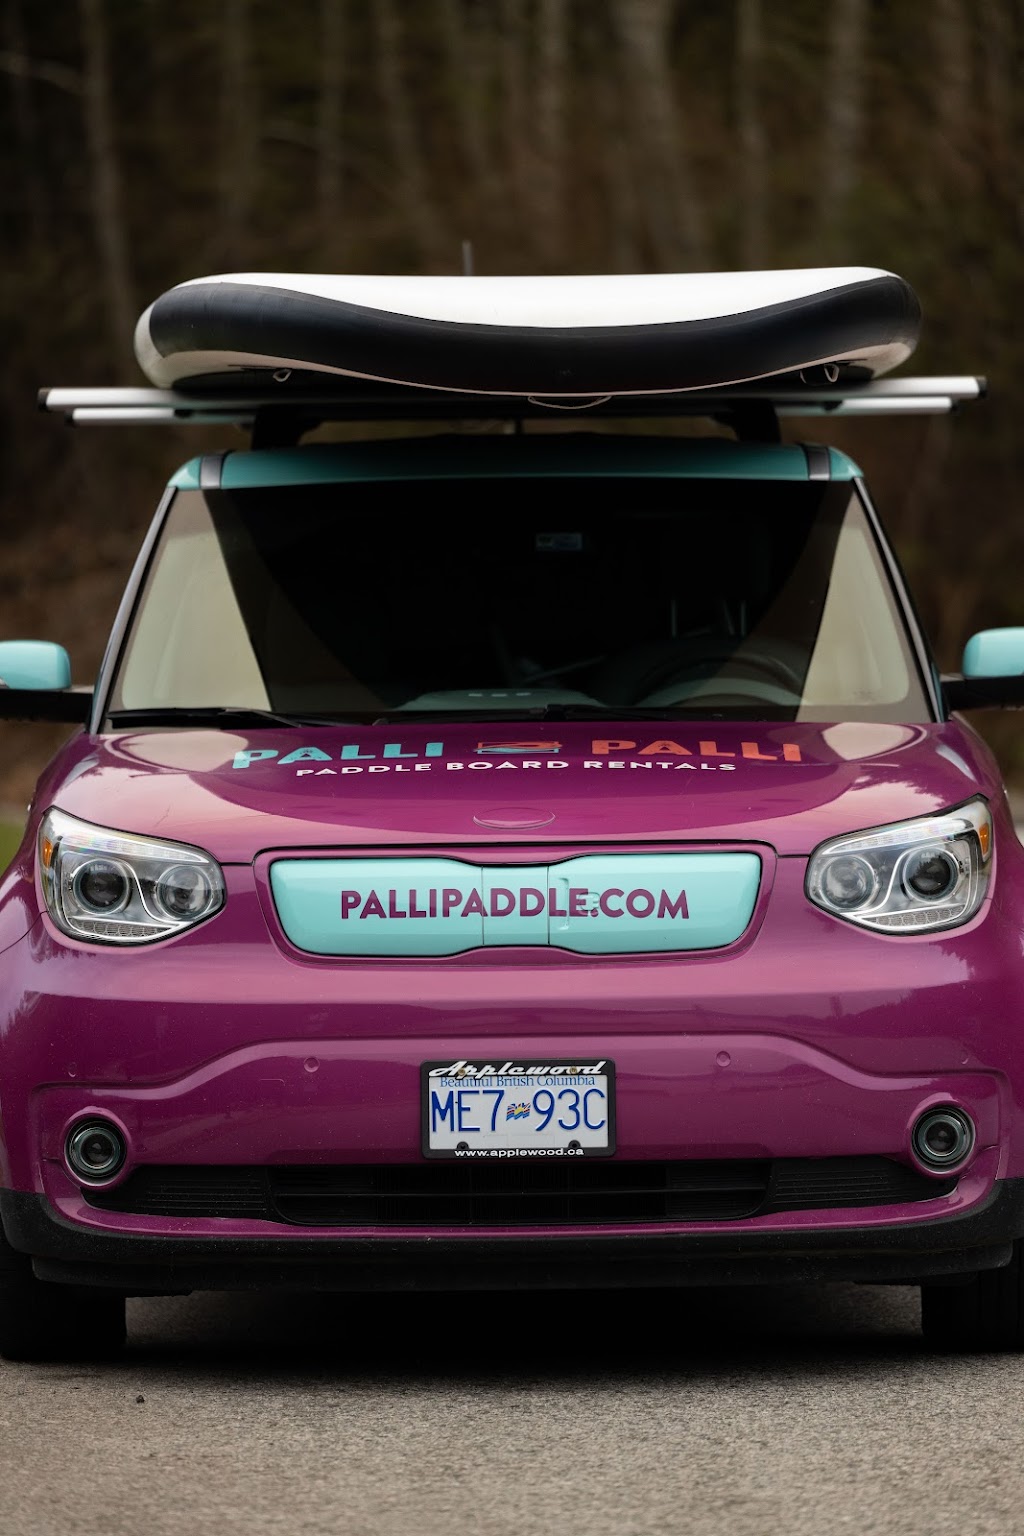 Palli Palli Mobile Paddle Board Rentals - South Sunshine Coast | point of interest | 5009 Gonzales Rd, Madeira Park, BC V0N 2H1, Canada | 6042237284 OR +1 604-223-7284